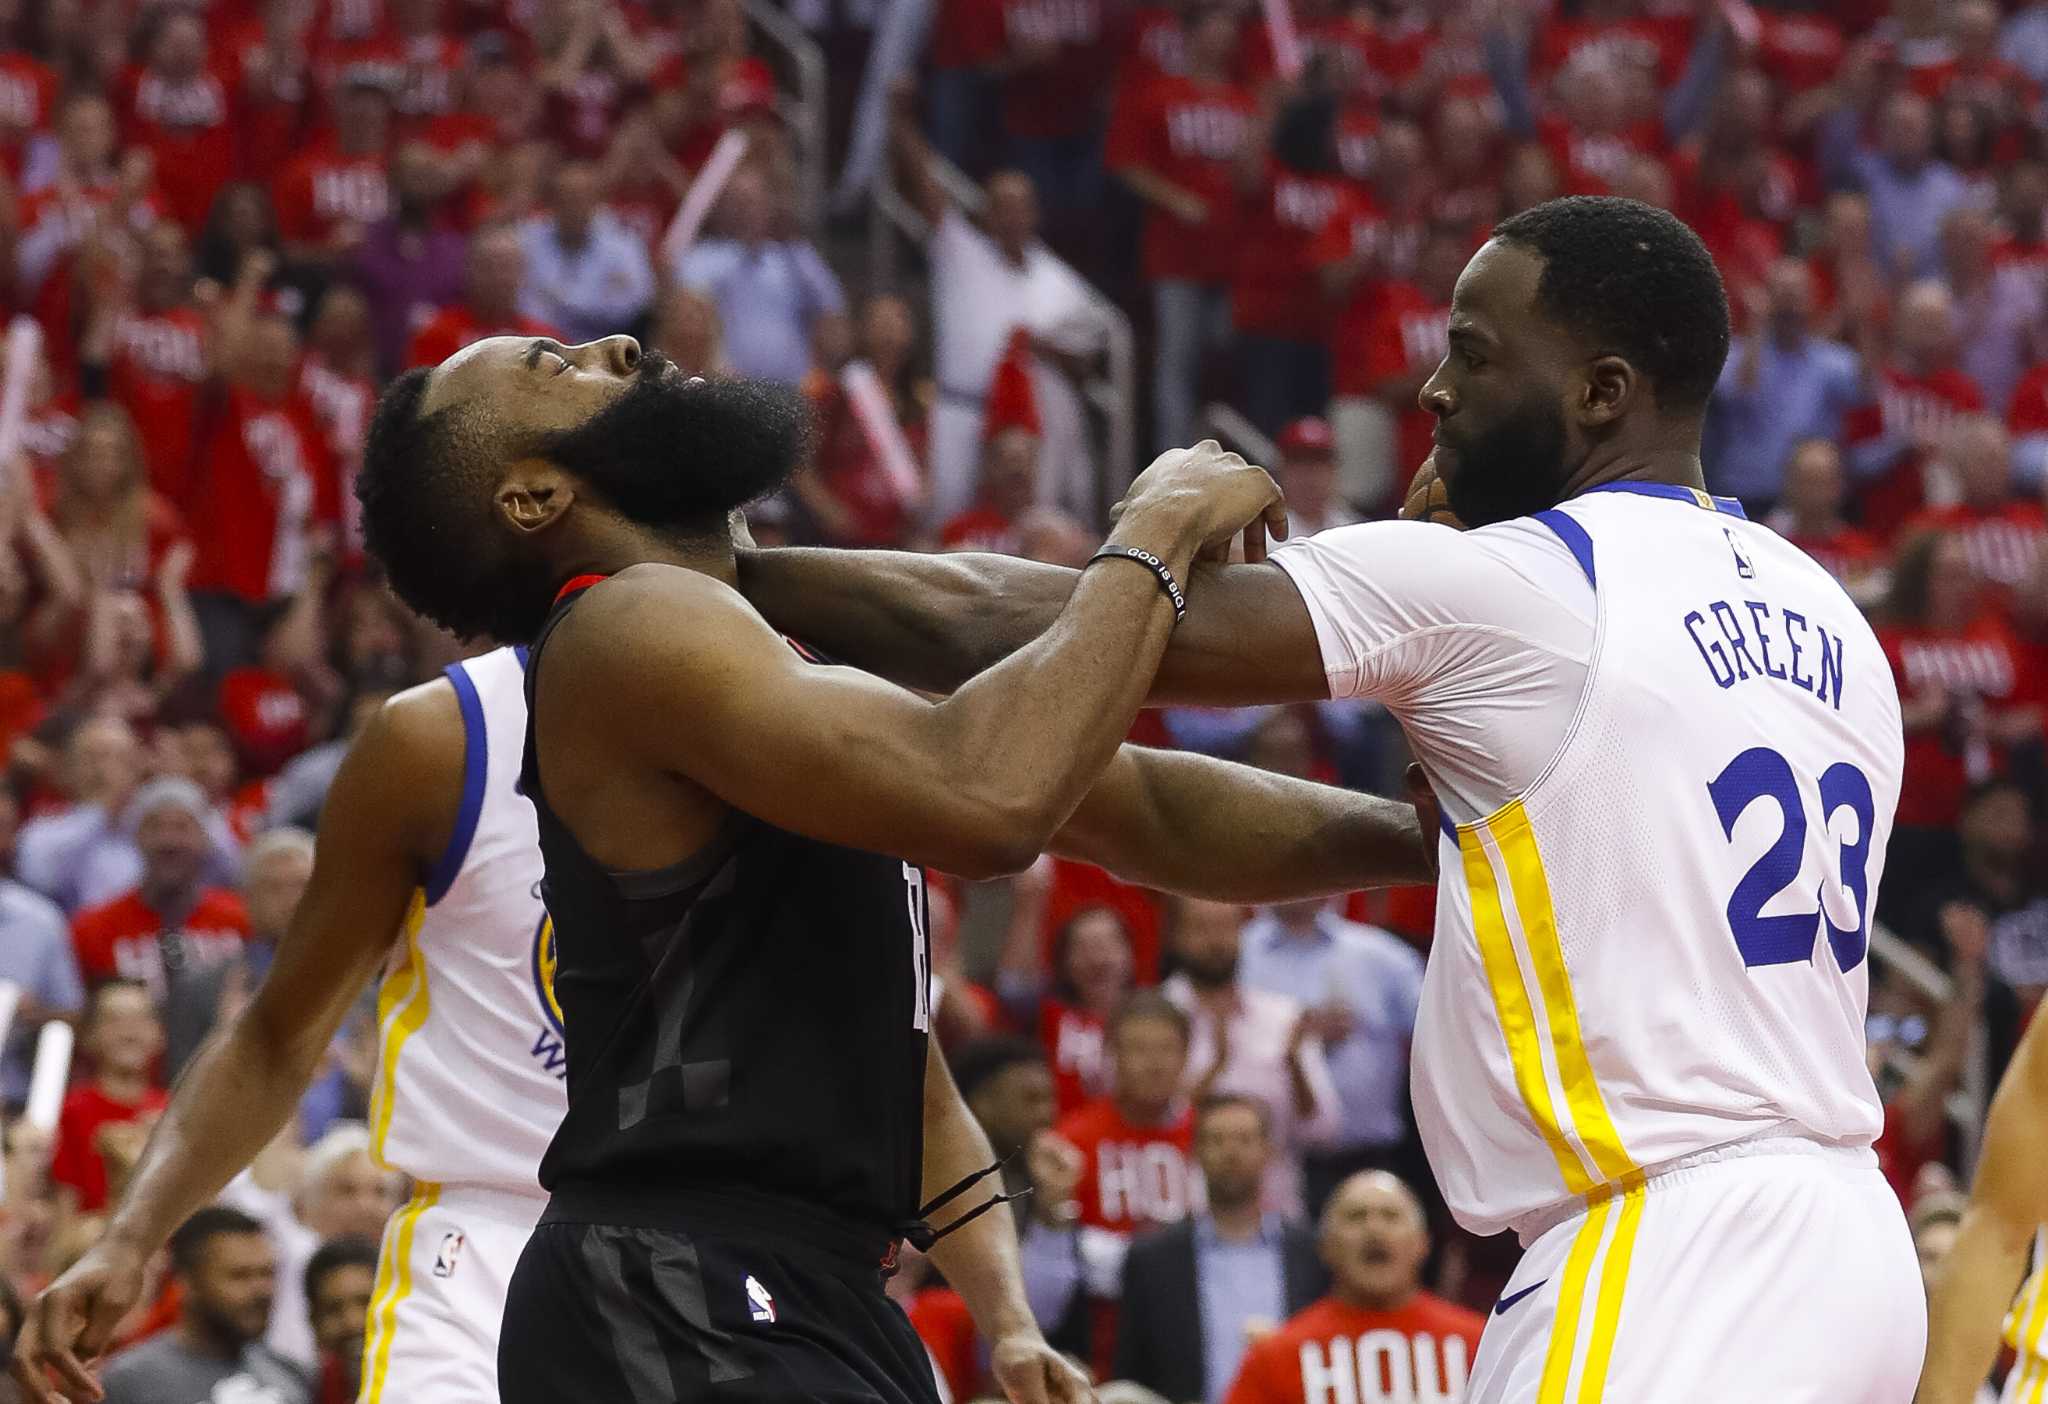 Draymond Green brings the passion, as usual - HoustonChronicle.com